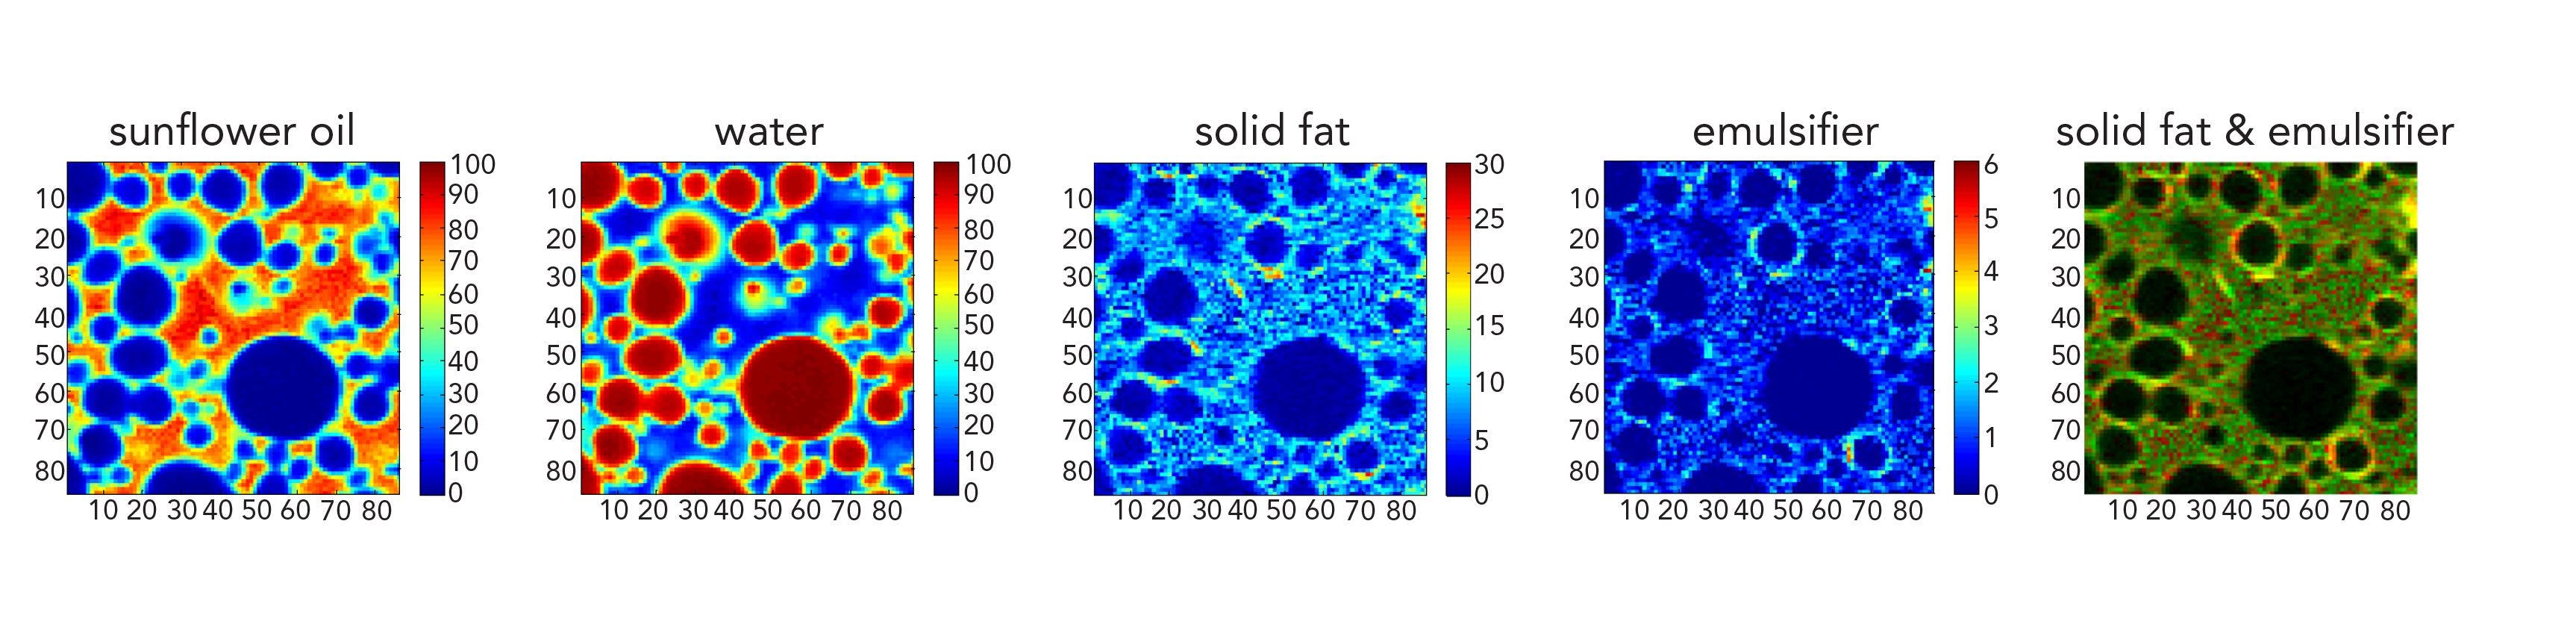 Figure 2: Raman images of a water-in-oil emulsion: From left to right, the concentration of sunflower oil, water, solid fat, and emulsifier is shown in single images, with the highest concentrations in red and the lowest in dark blue. In the rightmost image, solid fat and emulsifier Raman signals are overlaid. Image parameters: 20 x 20 μm2, 86 x 86 pixels. Images courtesy of Gerard van Dalen and colleagues, Unilever, Vlaardingen, NL